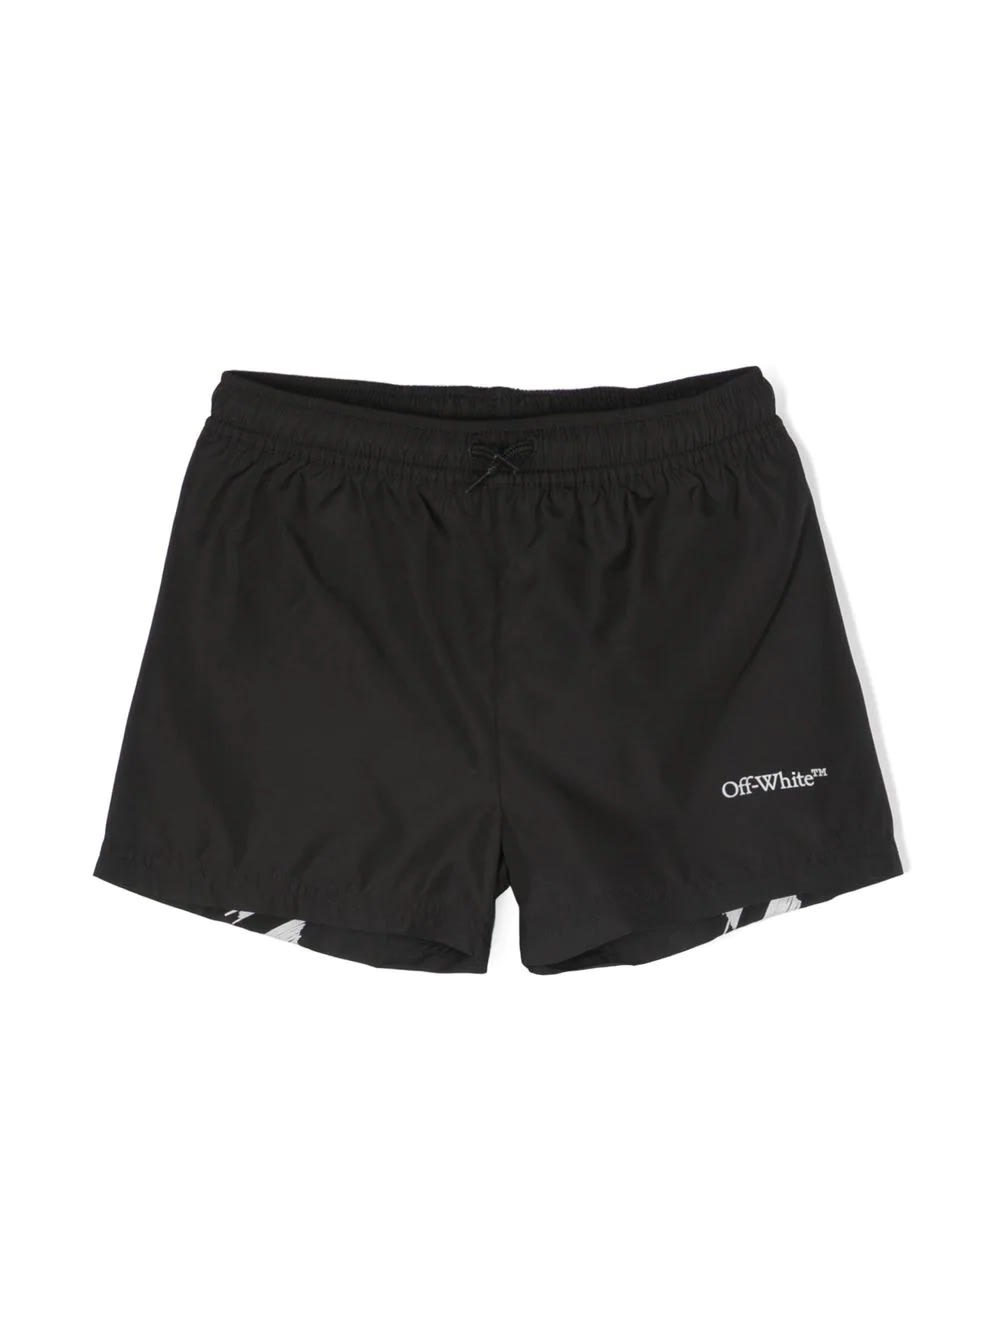 OFF-WHITE BLACK SWIM SHORTS WITH LOGO AND DIAGONALS